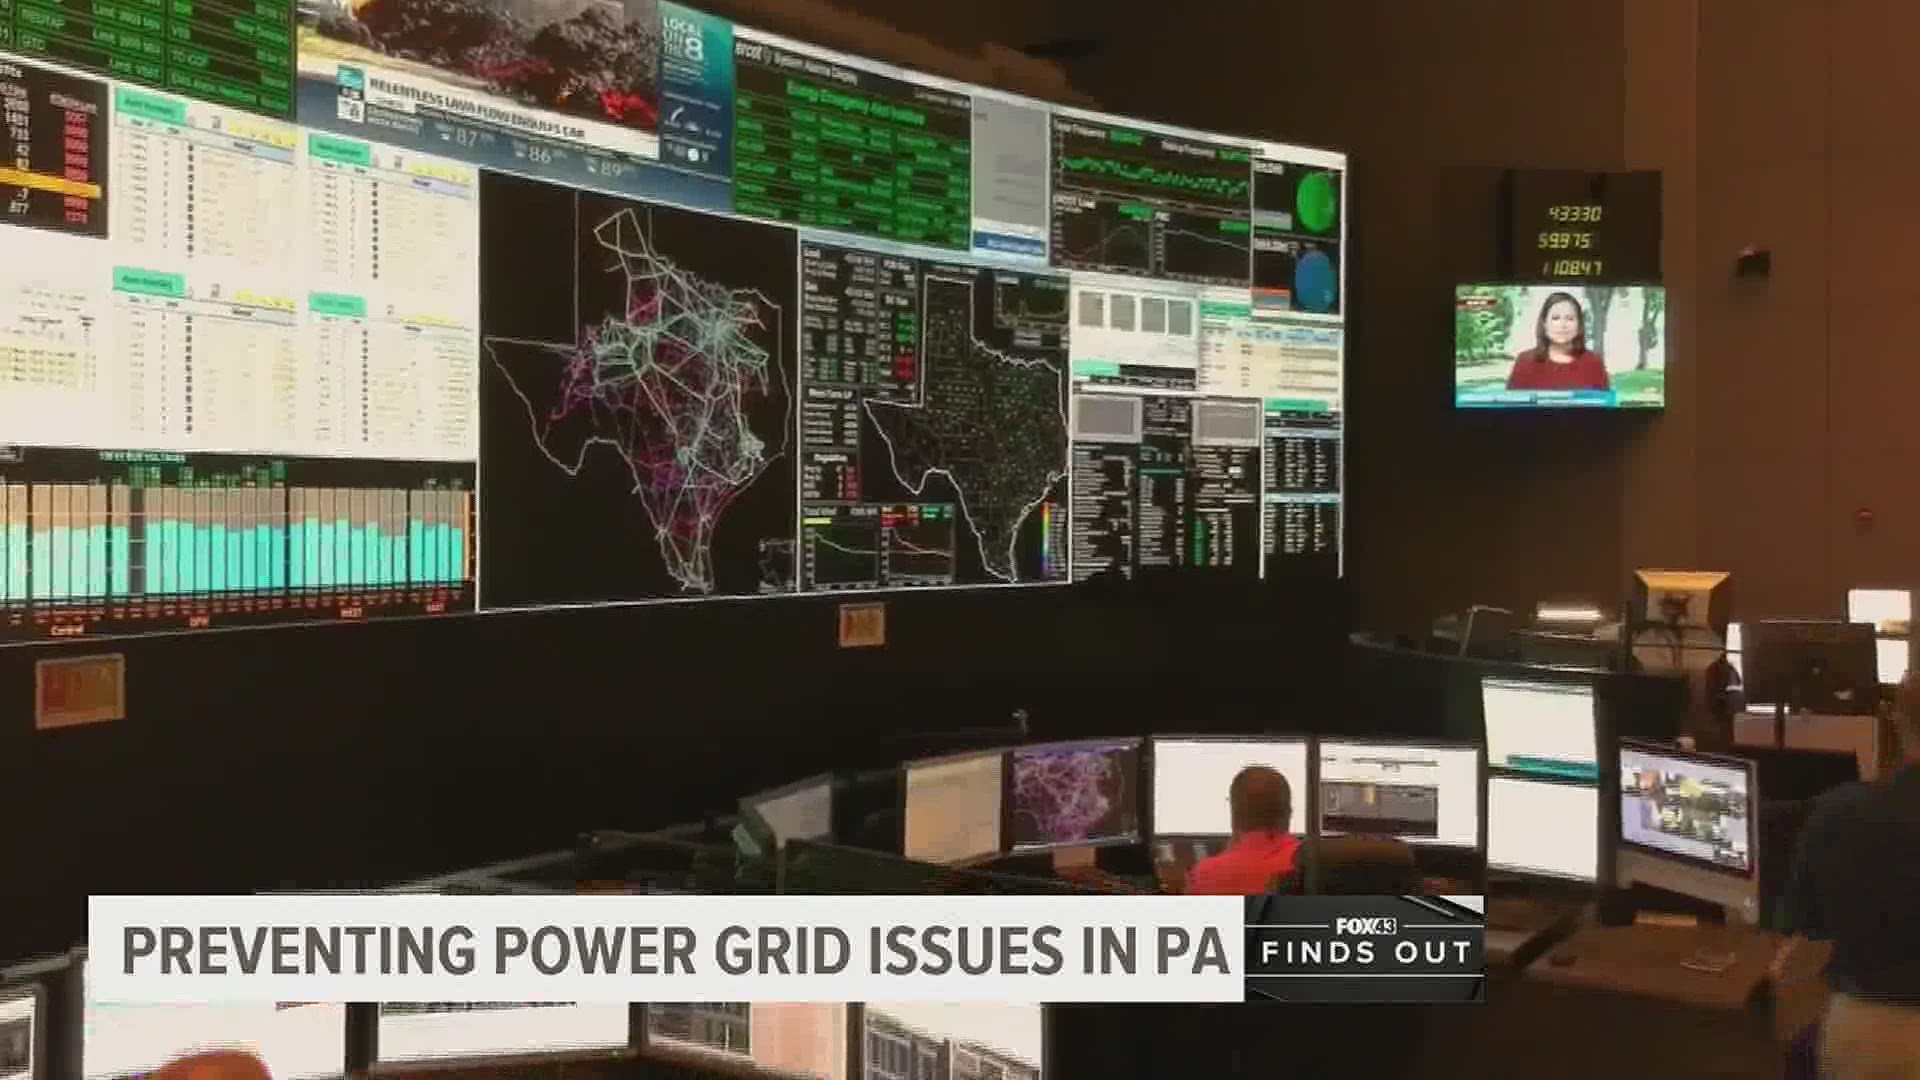 While energy experts say it's unlikely PA would be in a similar situation as Texas, FOX43 Finds Out it's not impossible.